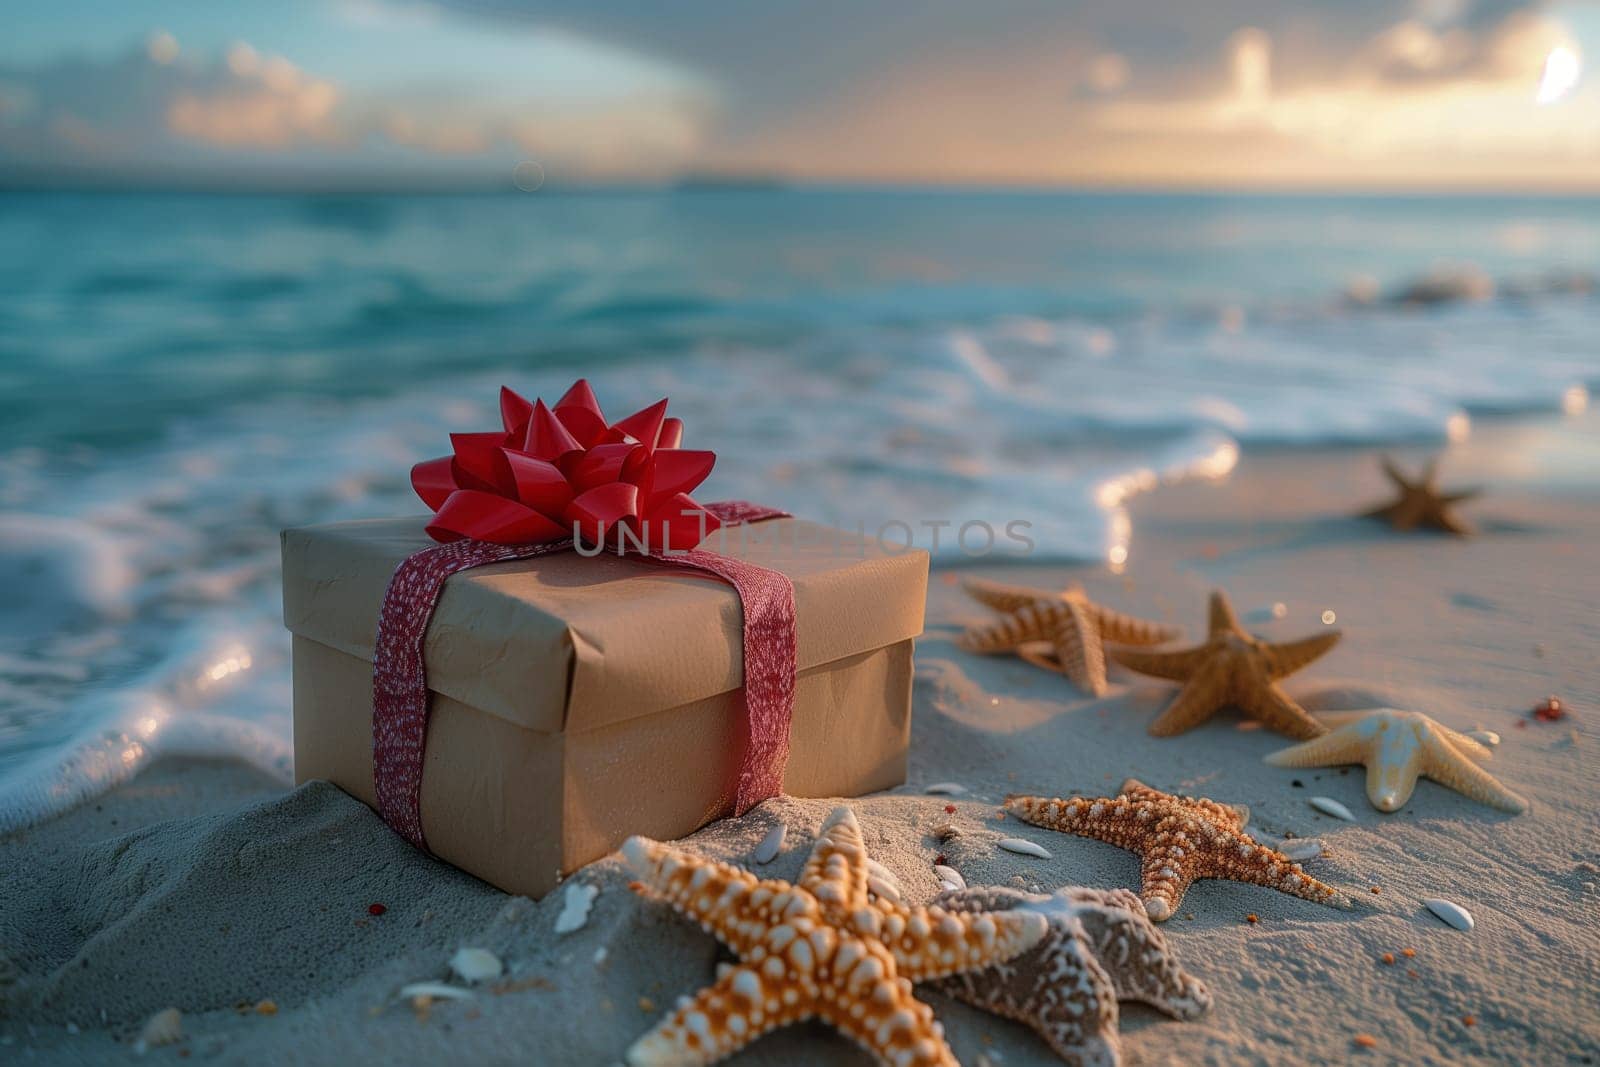 A gift box with a red bow sits on the sandy beach next to a starfish, with the tranquil water and clear blue sky creating a picturesque coastal landscape for leisurely travel